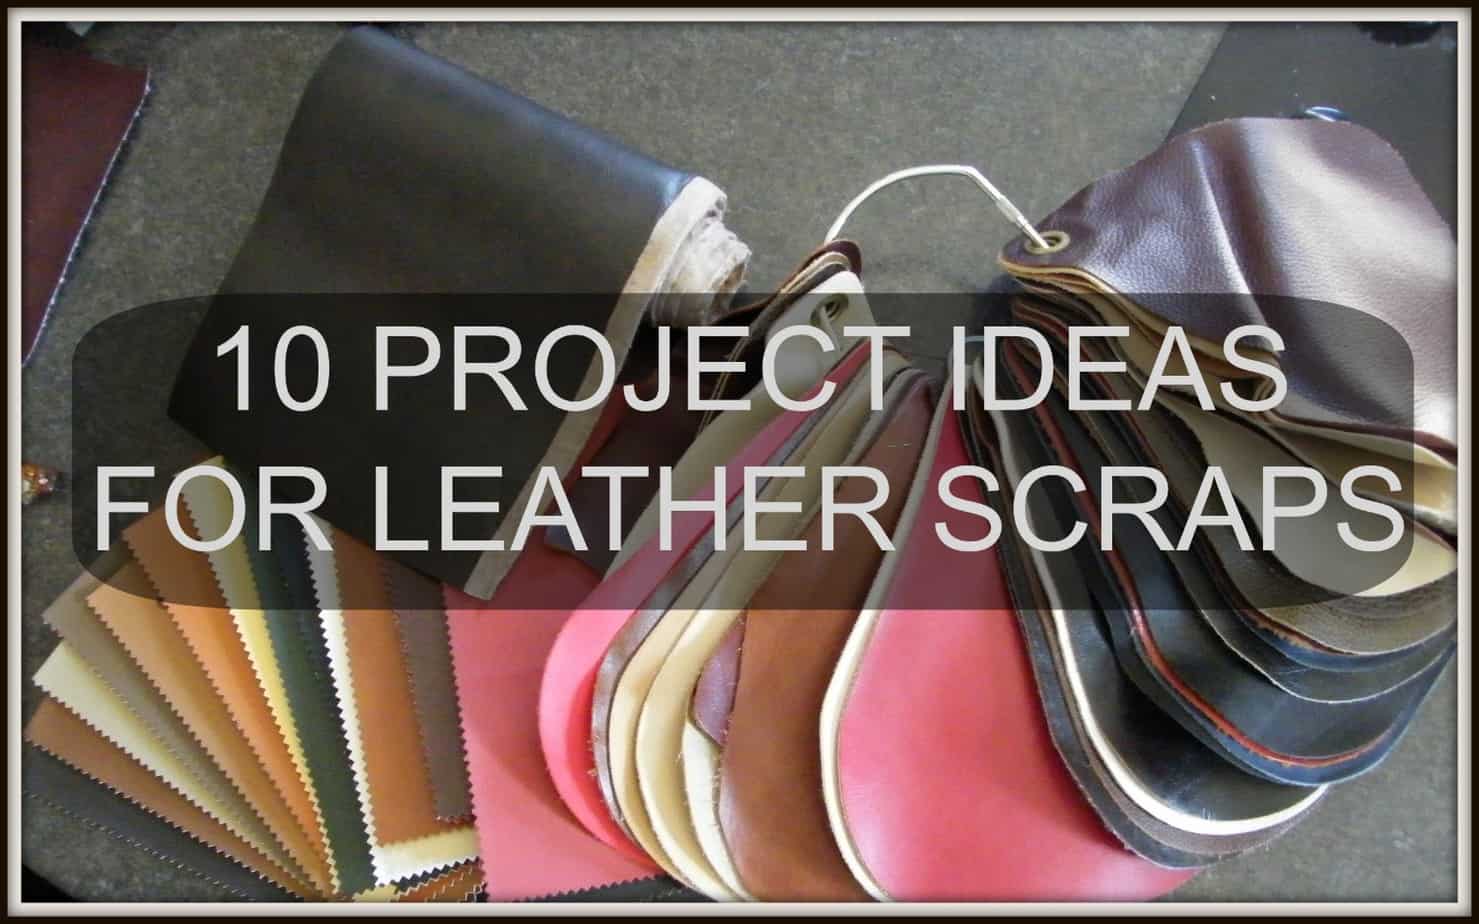 Can Upcycling Leather Turn Scraps Into Riches?